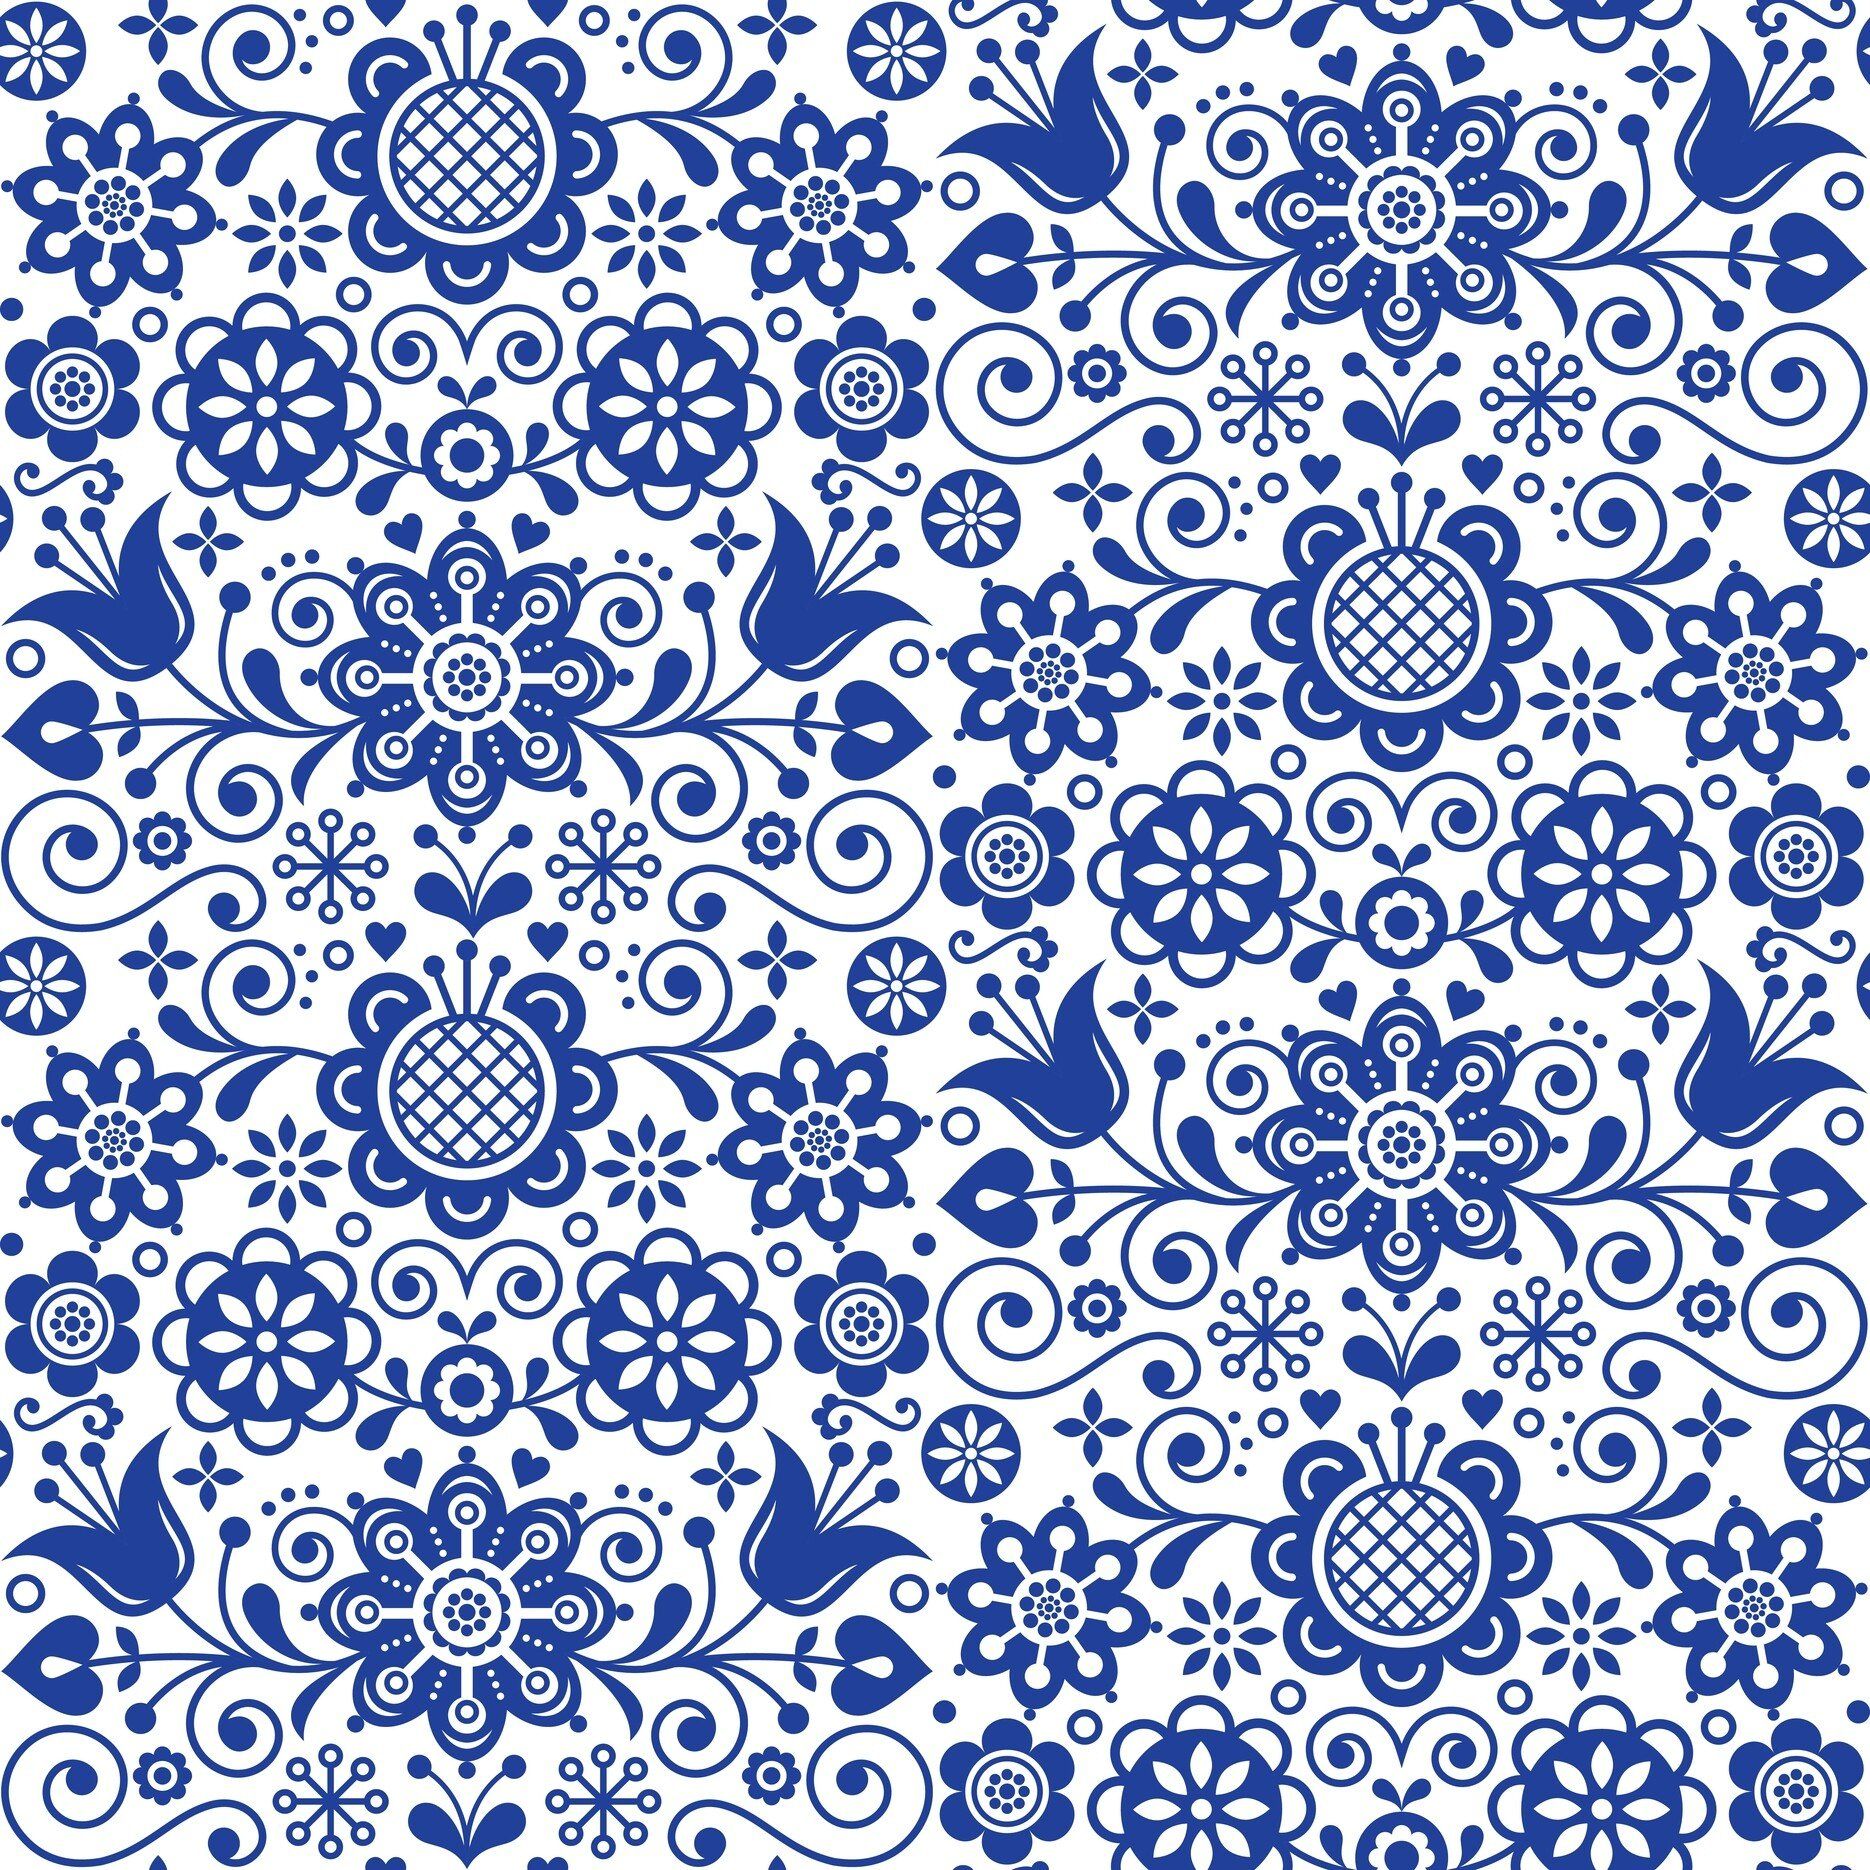 ORNATE BLUE GLASS  - Rice Paper for Decoupage– 3 sheets 11.81″ X 12.6″ - Belles and Whistles